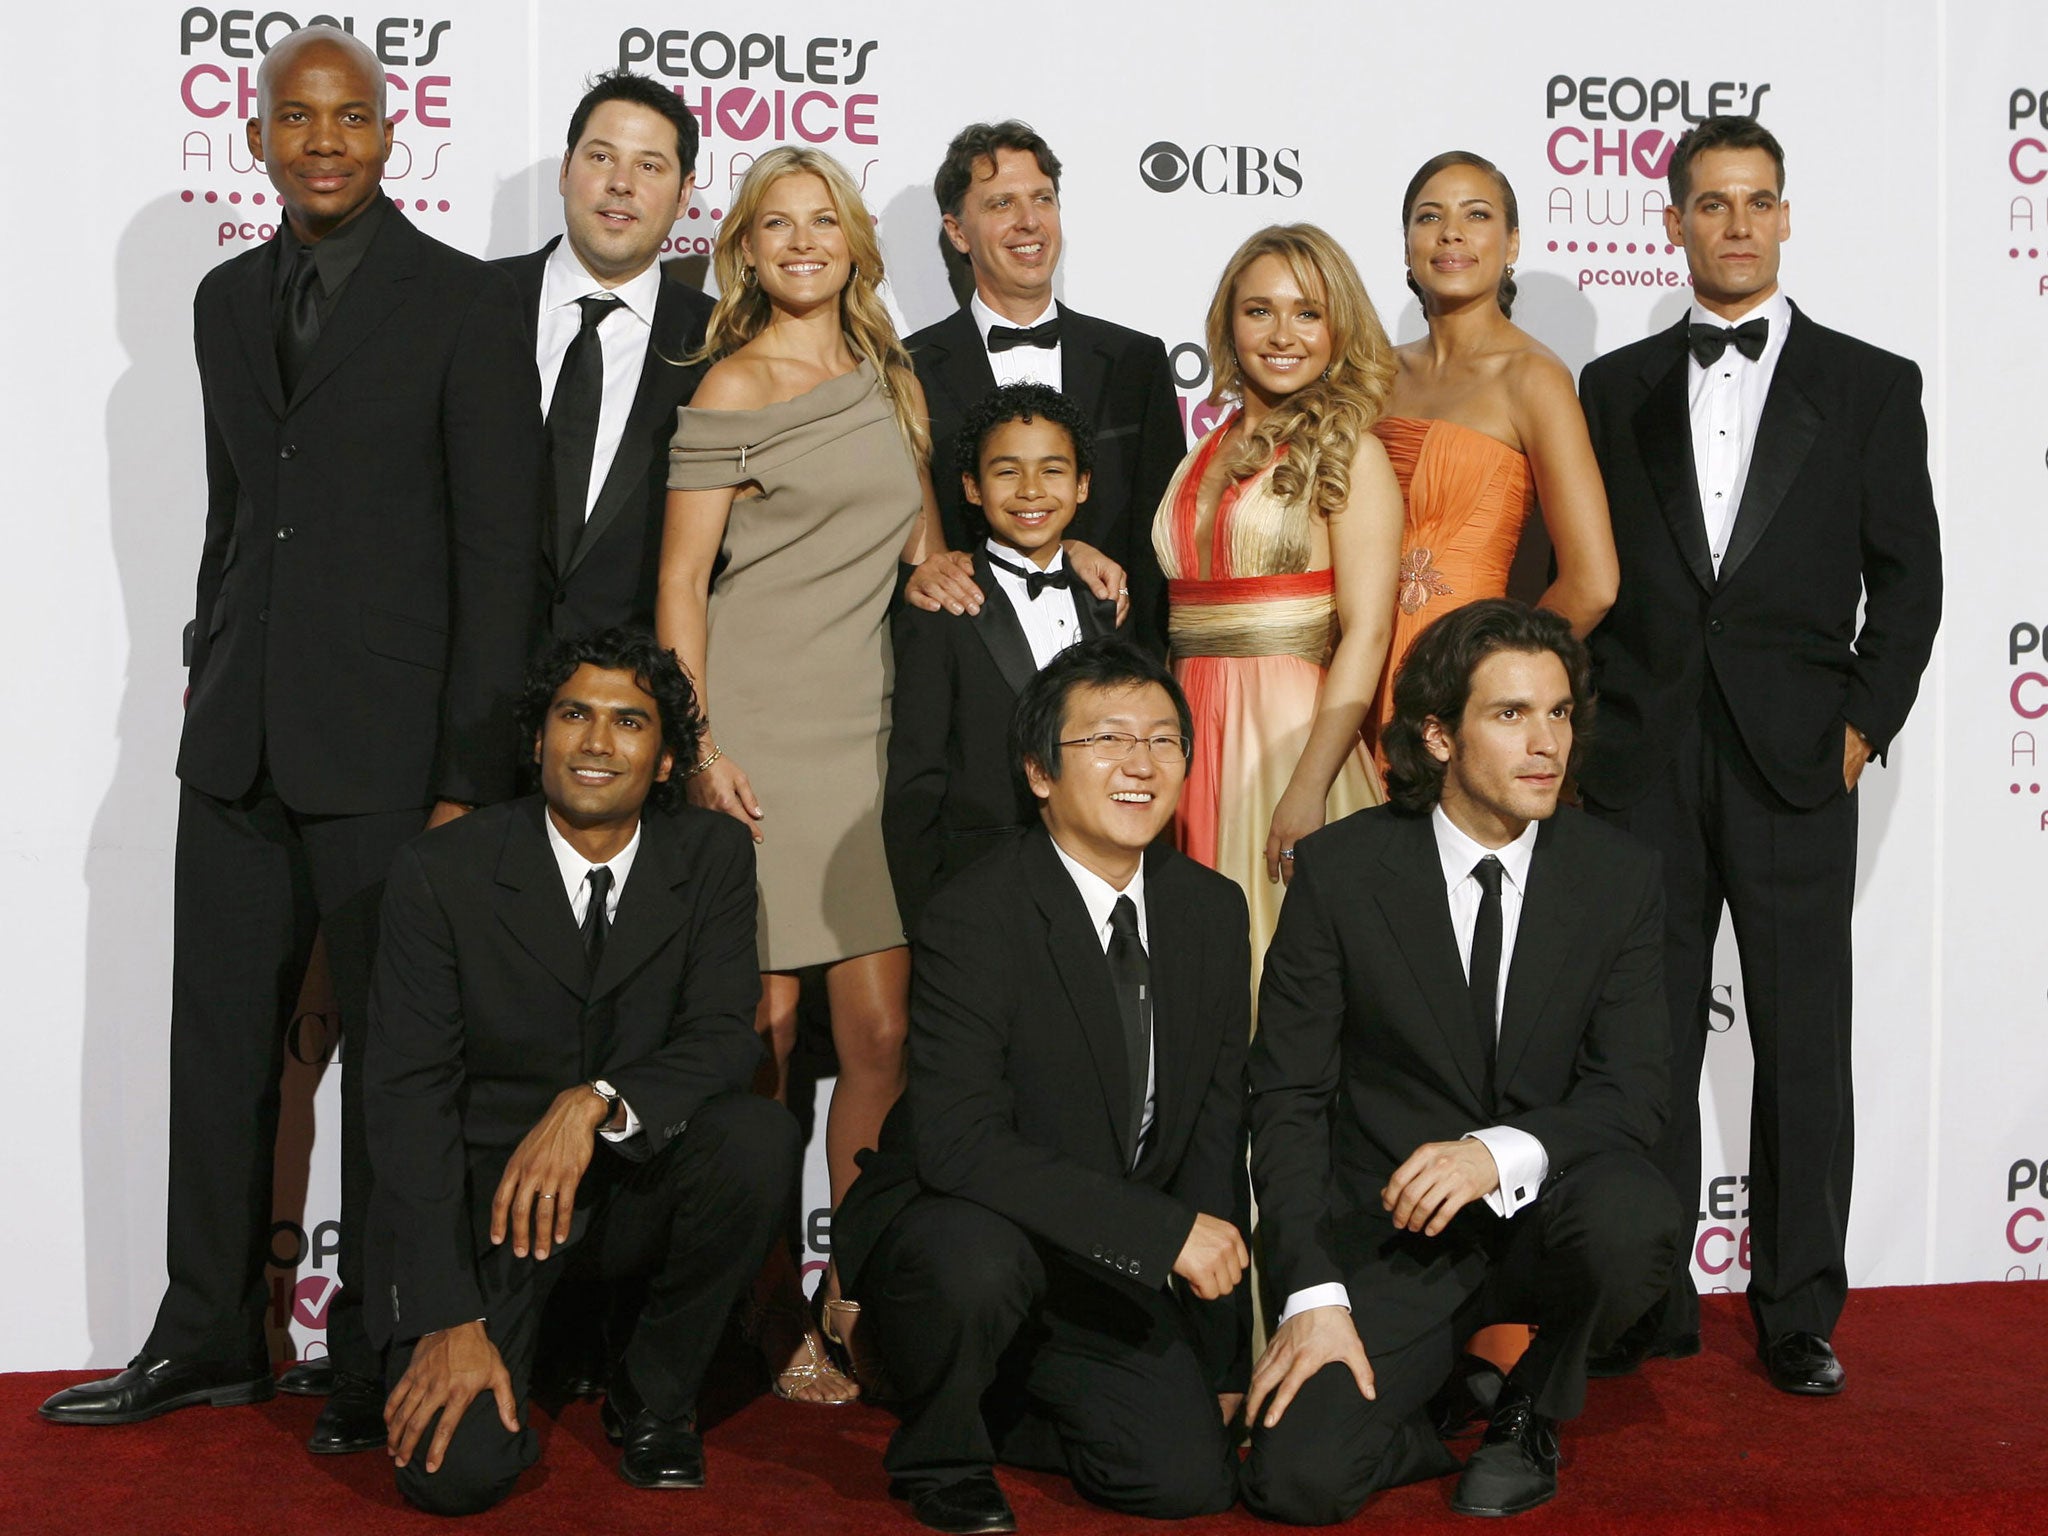 The cast of the original series of Heroes, which won favorite new TV drama at the 2007 People's Choice Awards